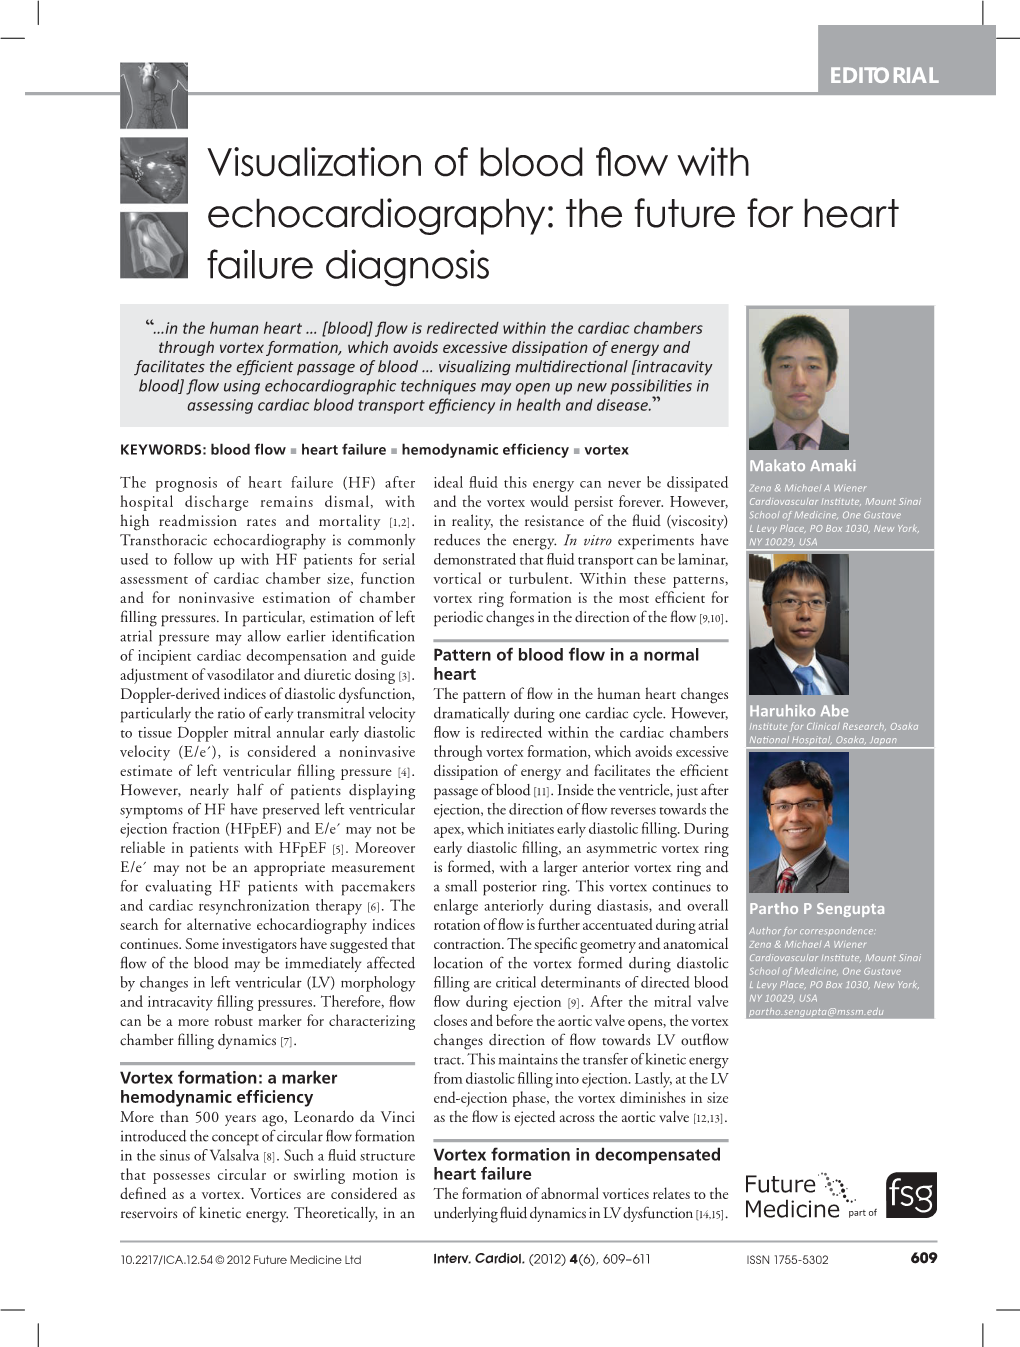 Visualization of Blood Flow with Echocardiography: the Future for Heart Failure Diagnosis